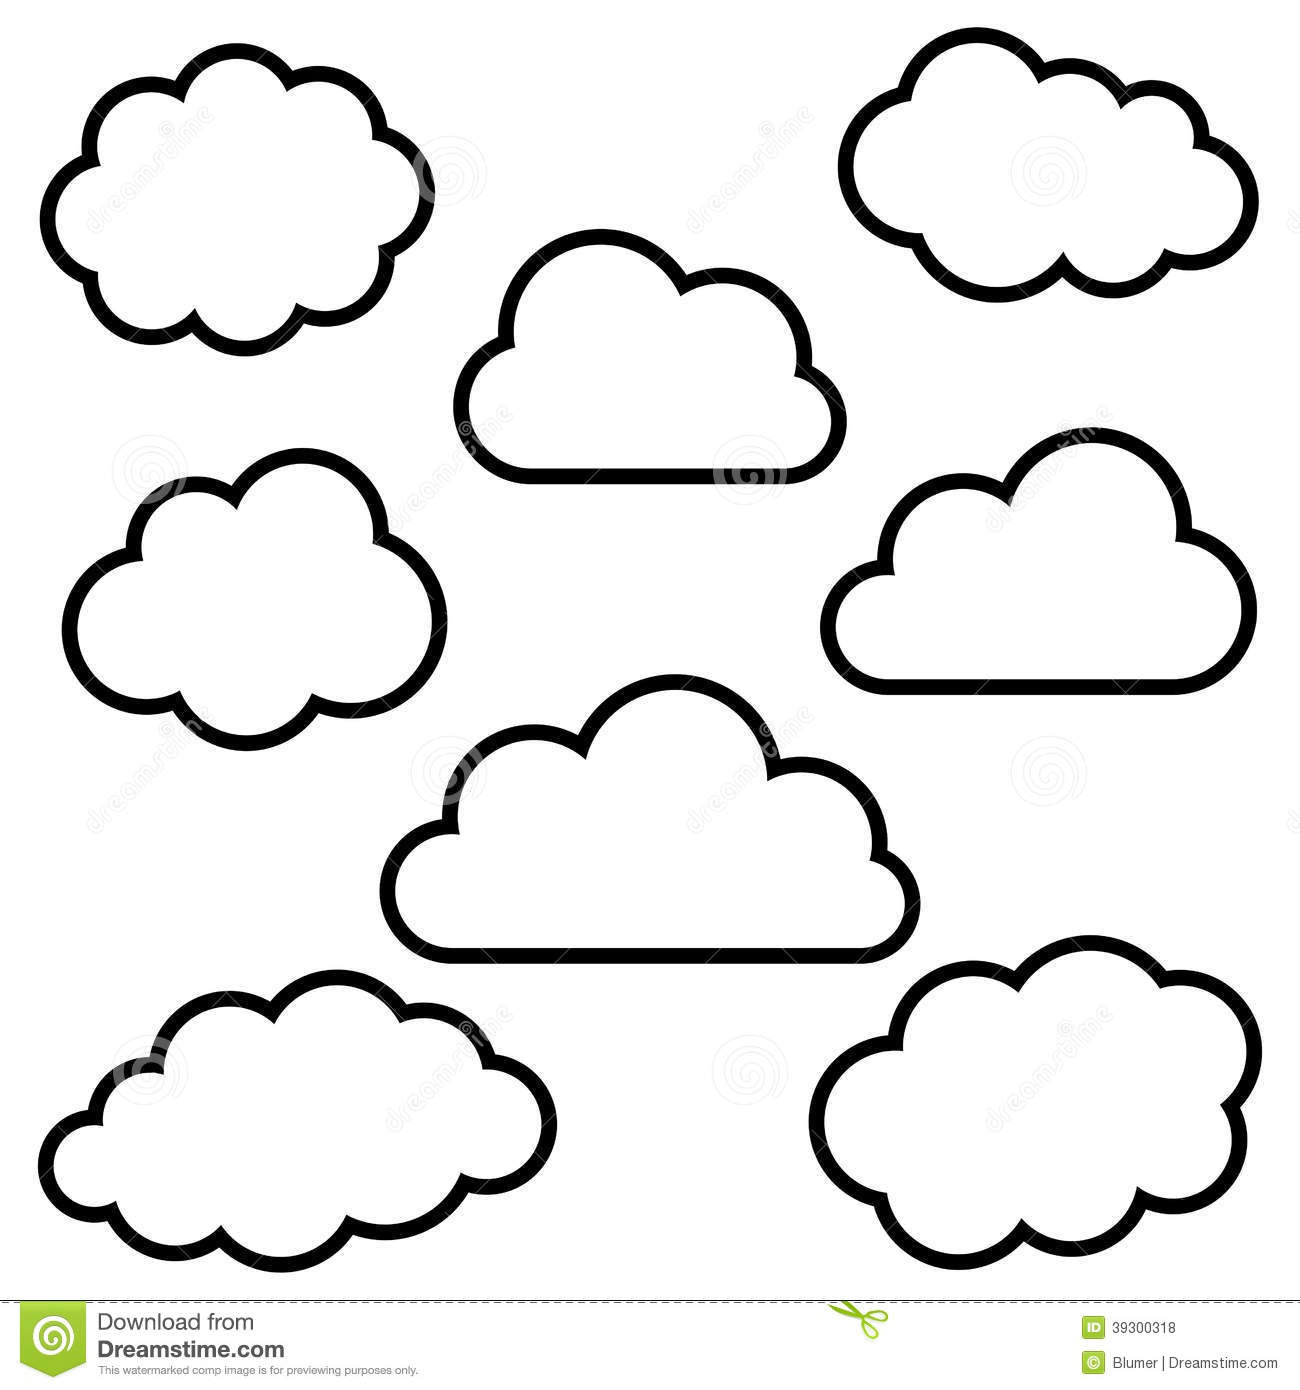 Sky black and white clipart